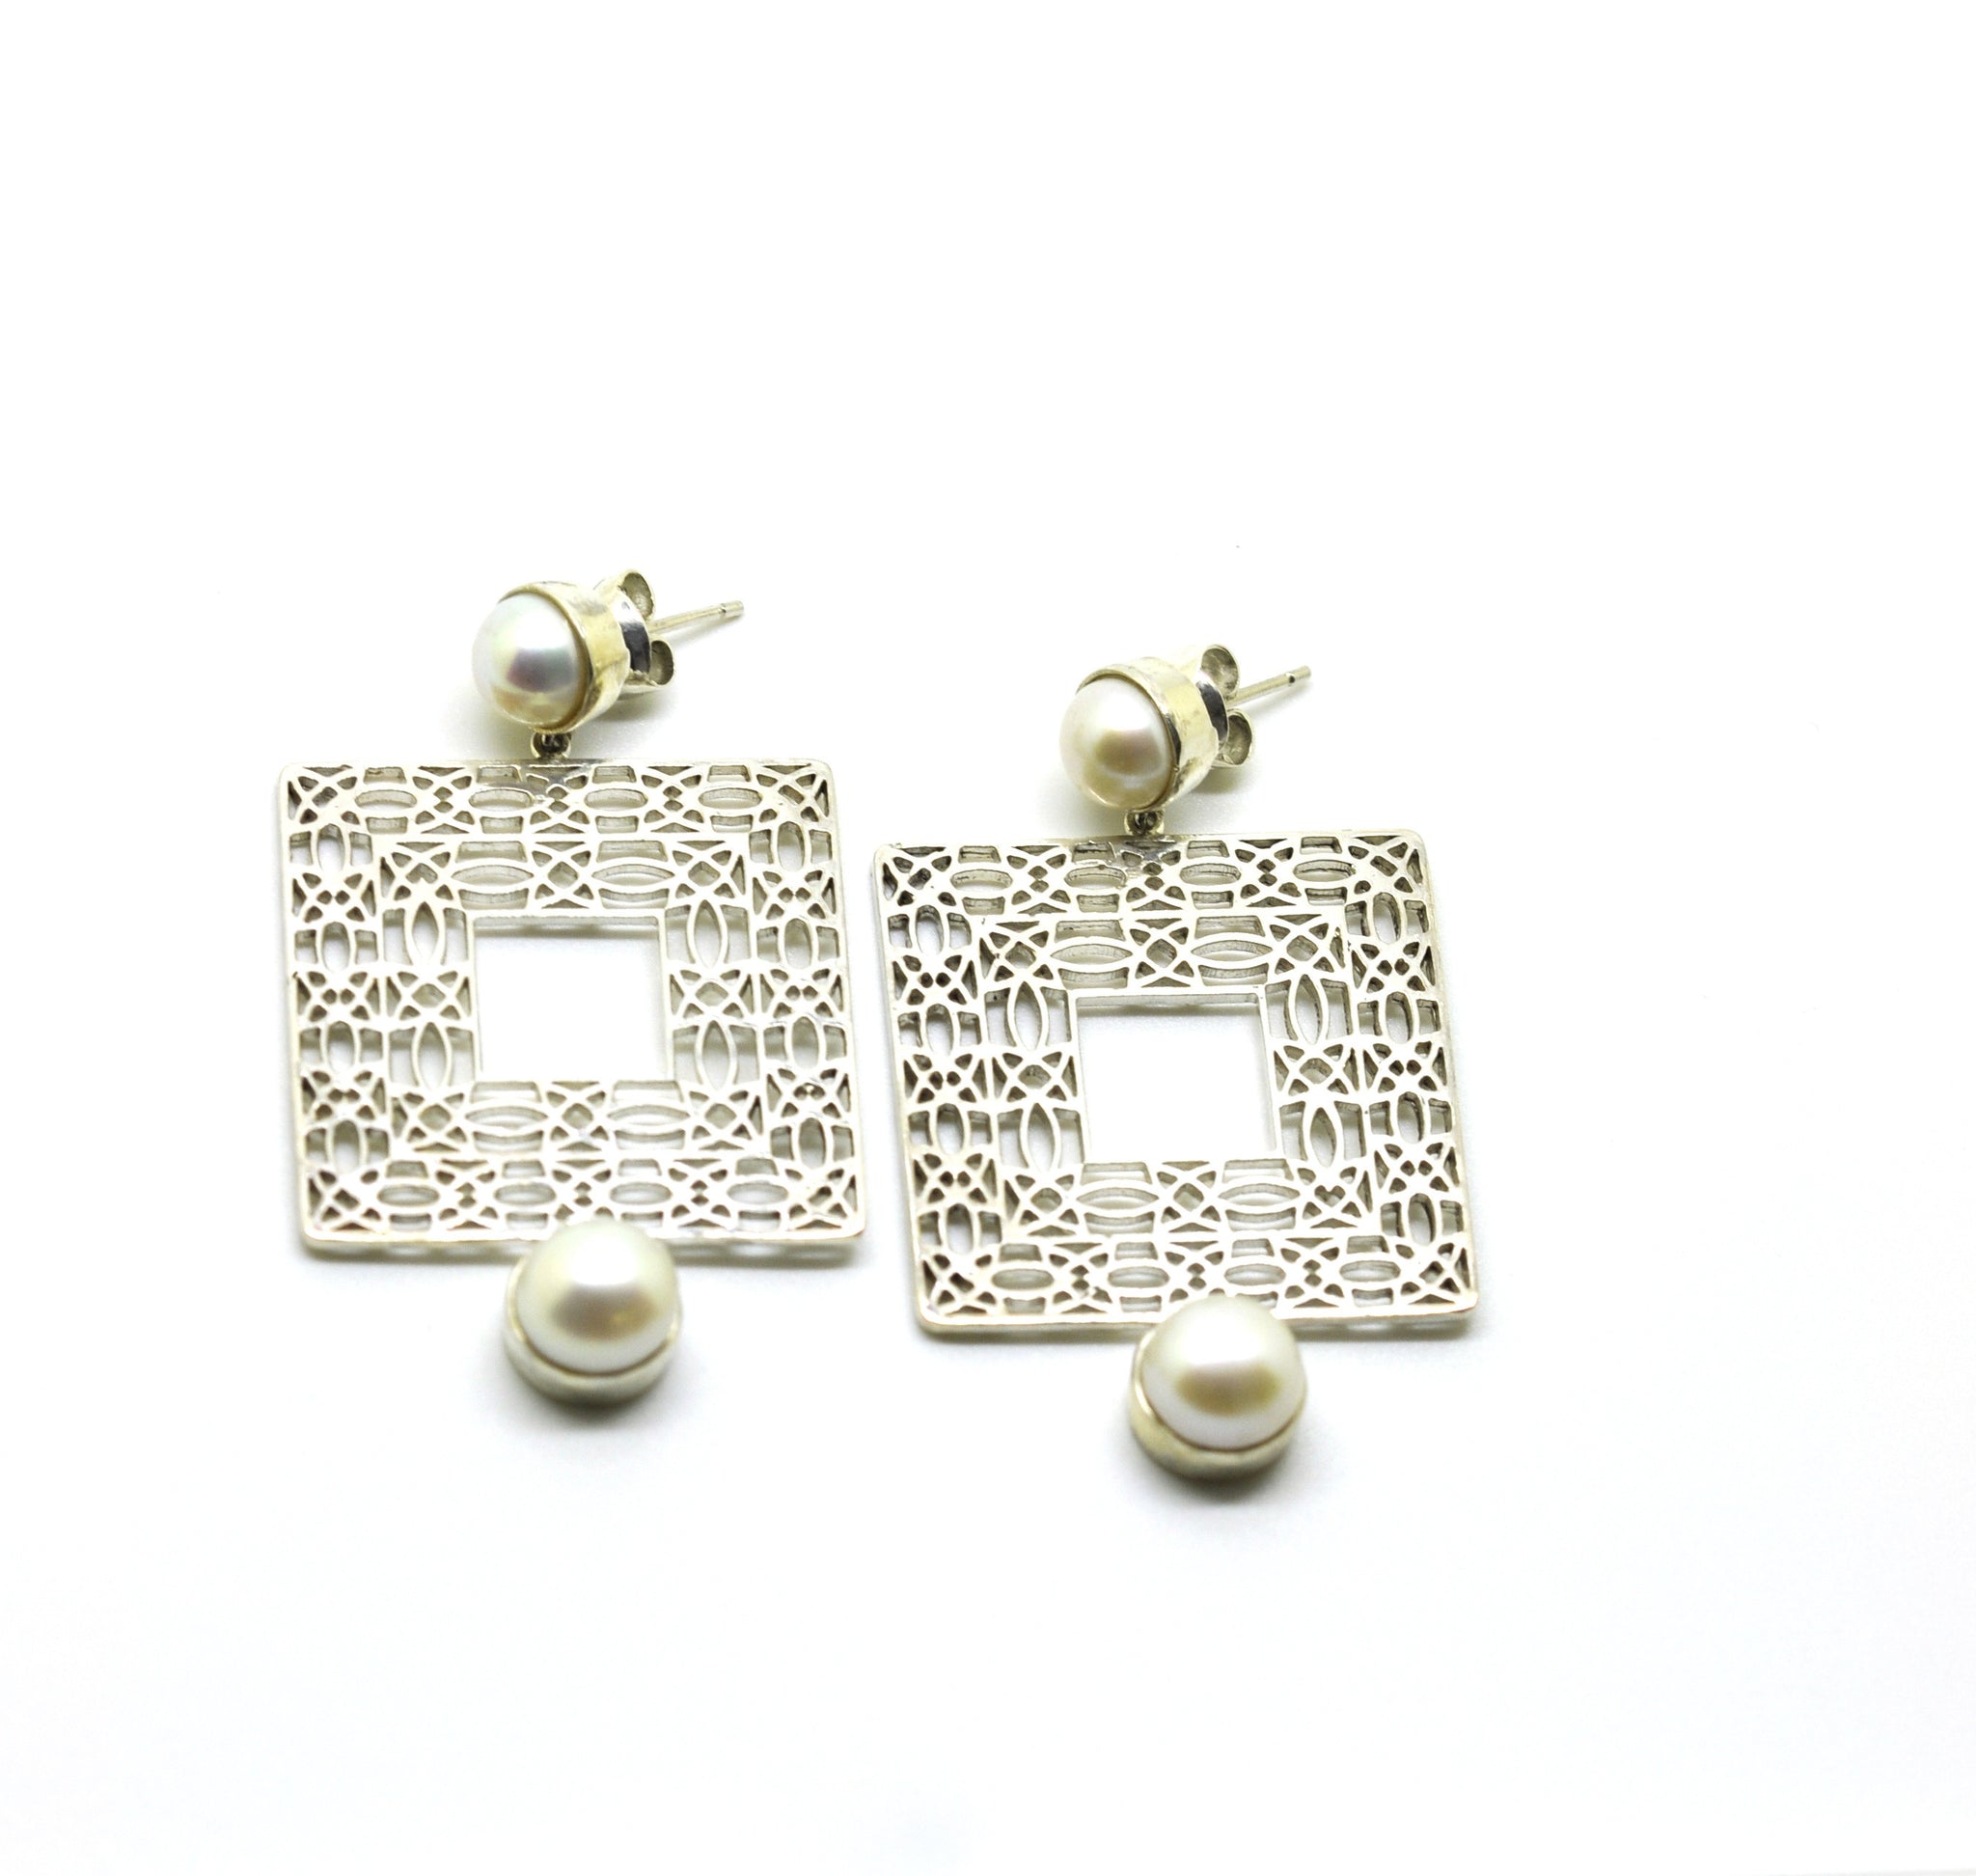 SOLD - CLEARANCE SALE Filigree - Square with pearls